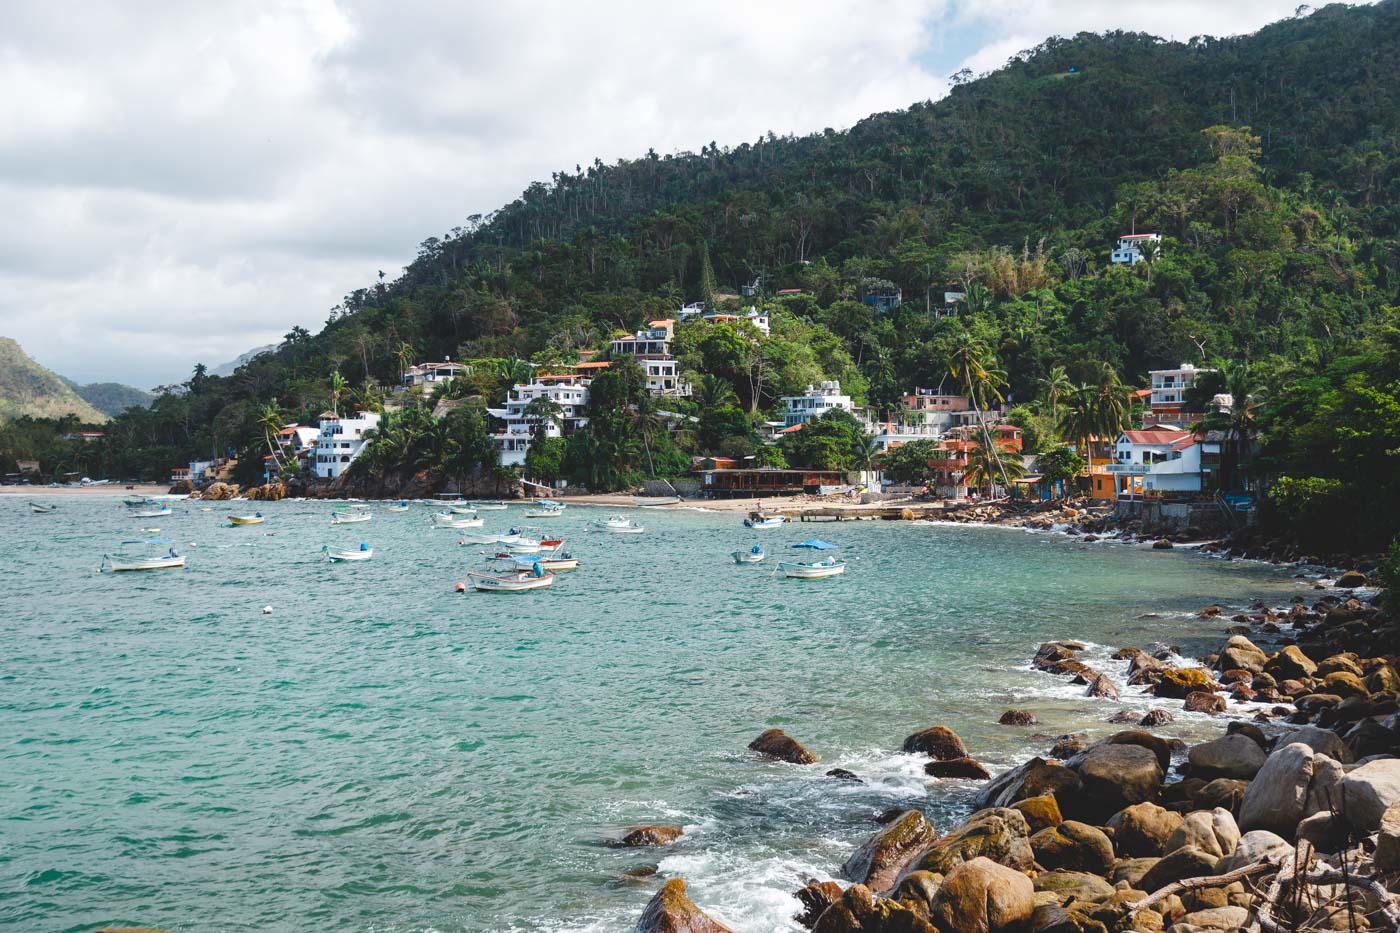 Lots of small boats anchored in a bay near Yelapa Beach with beach villas built into the forests on the mountain.